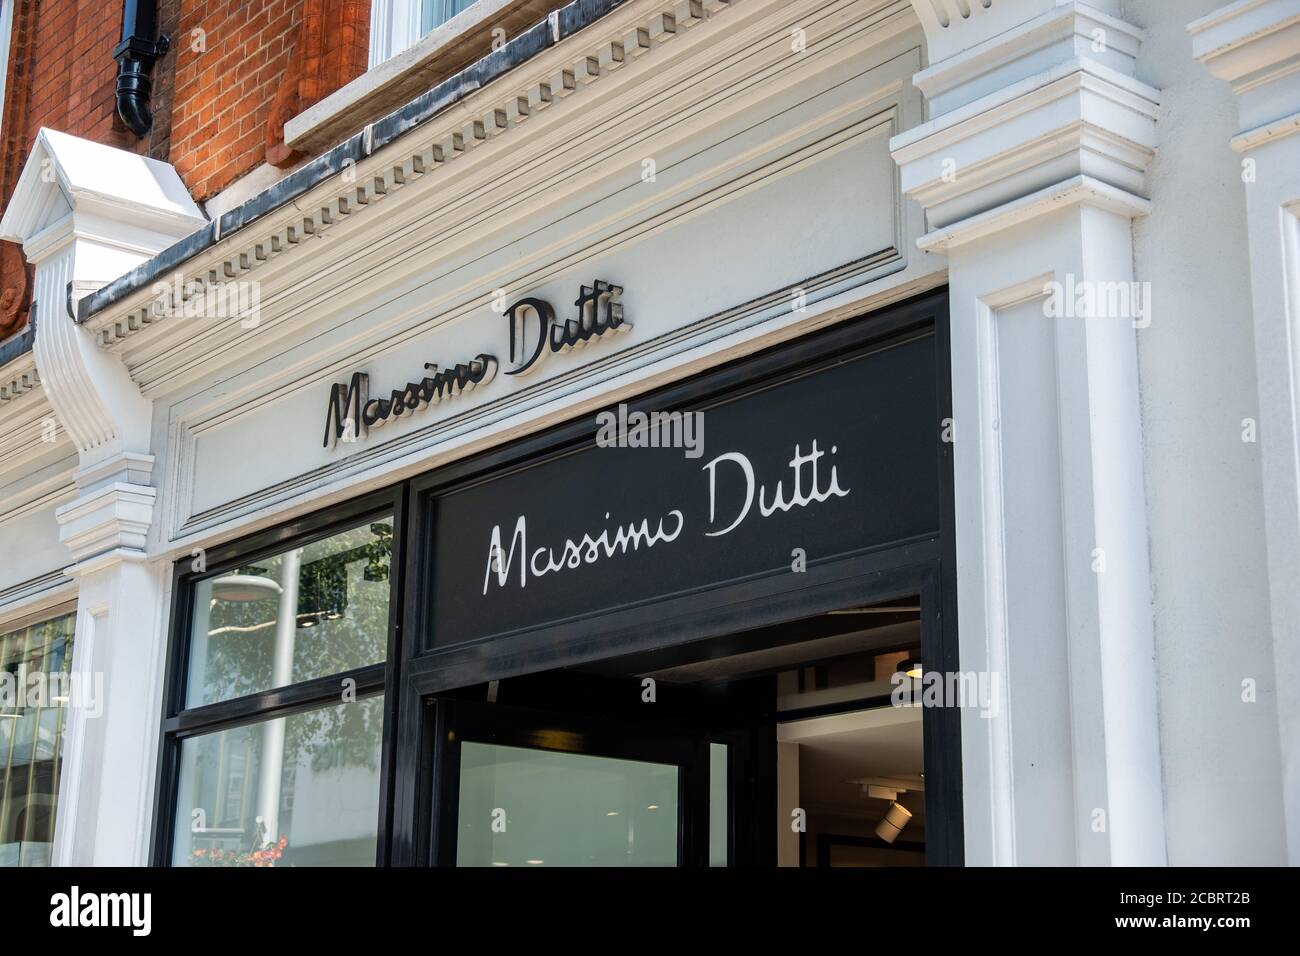 Massimo Dutti Store High Resolution Stock Photography and Images - Alamy